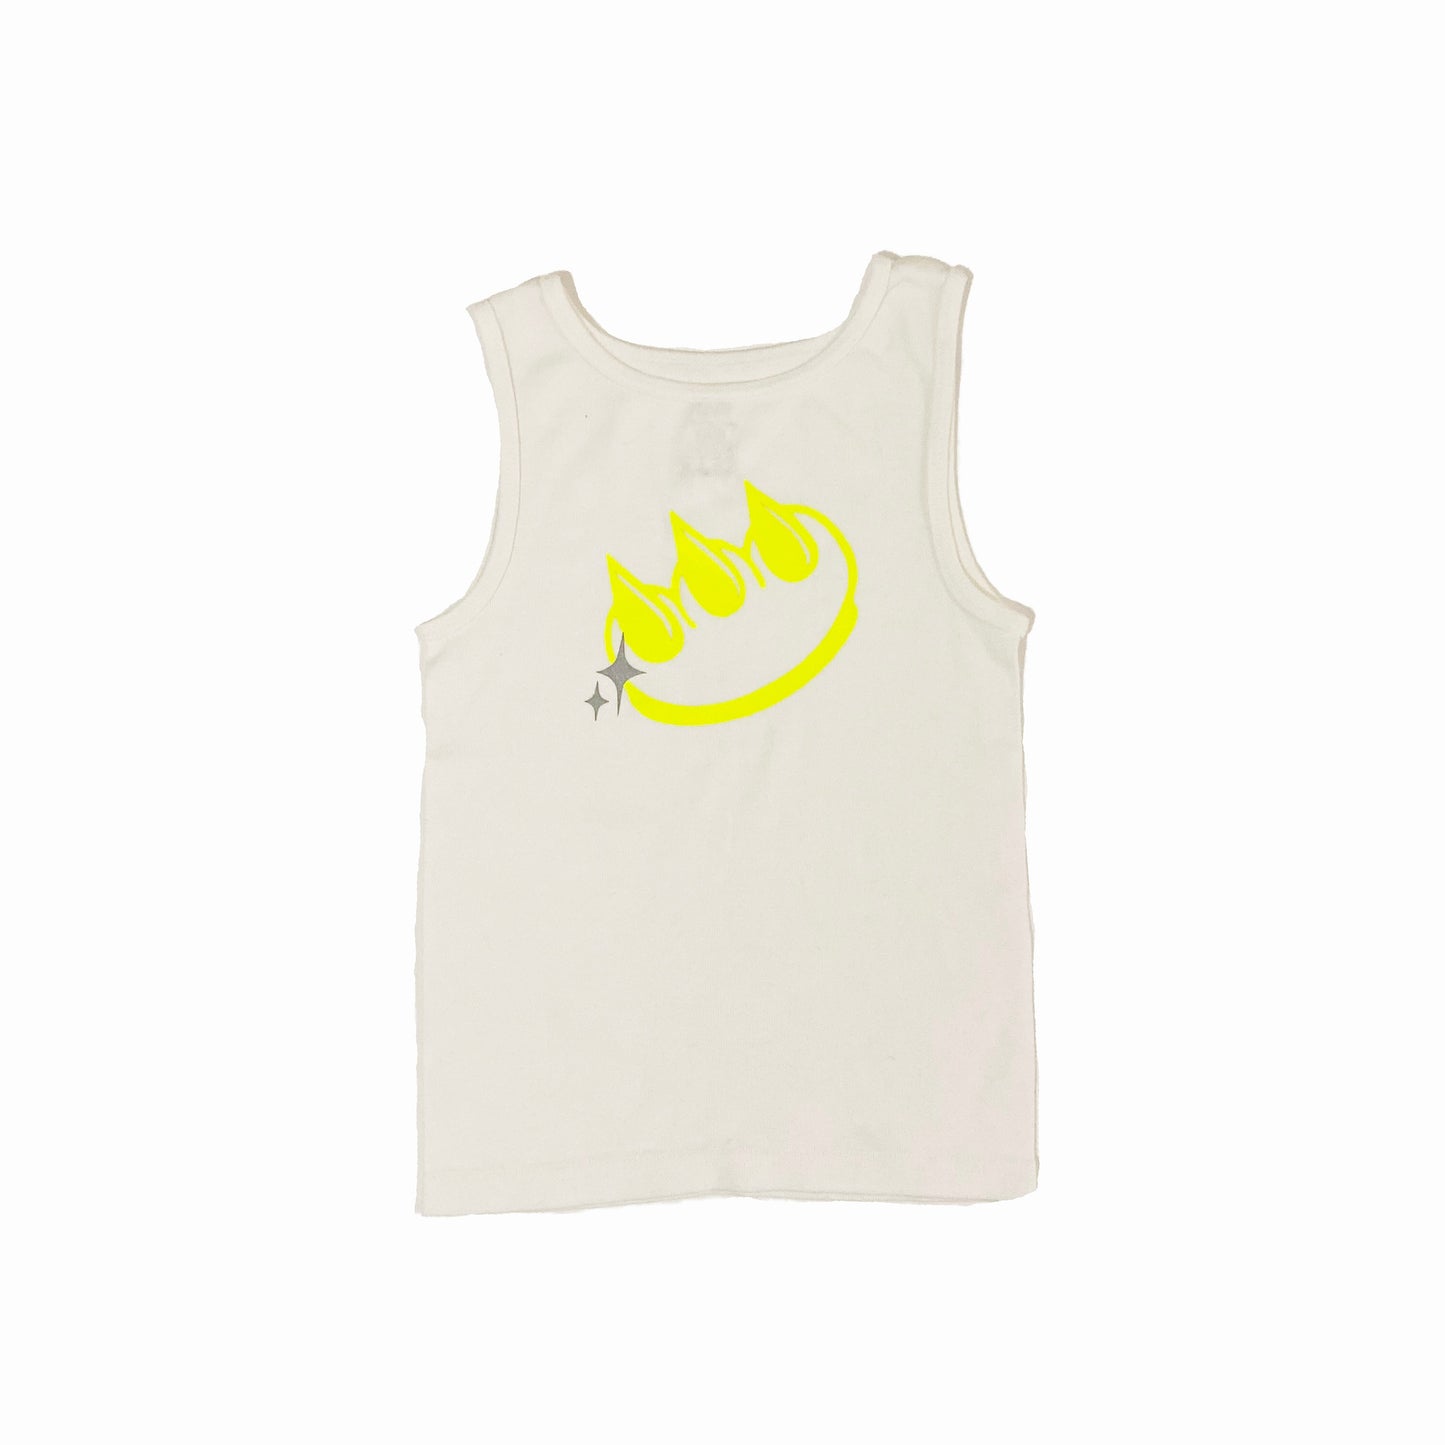 FLUORESCENT YELLOW CLAW TANK TOP